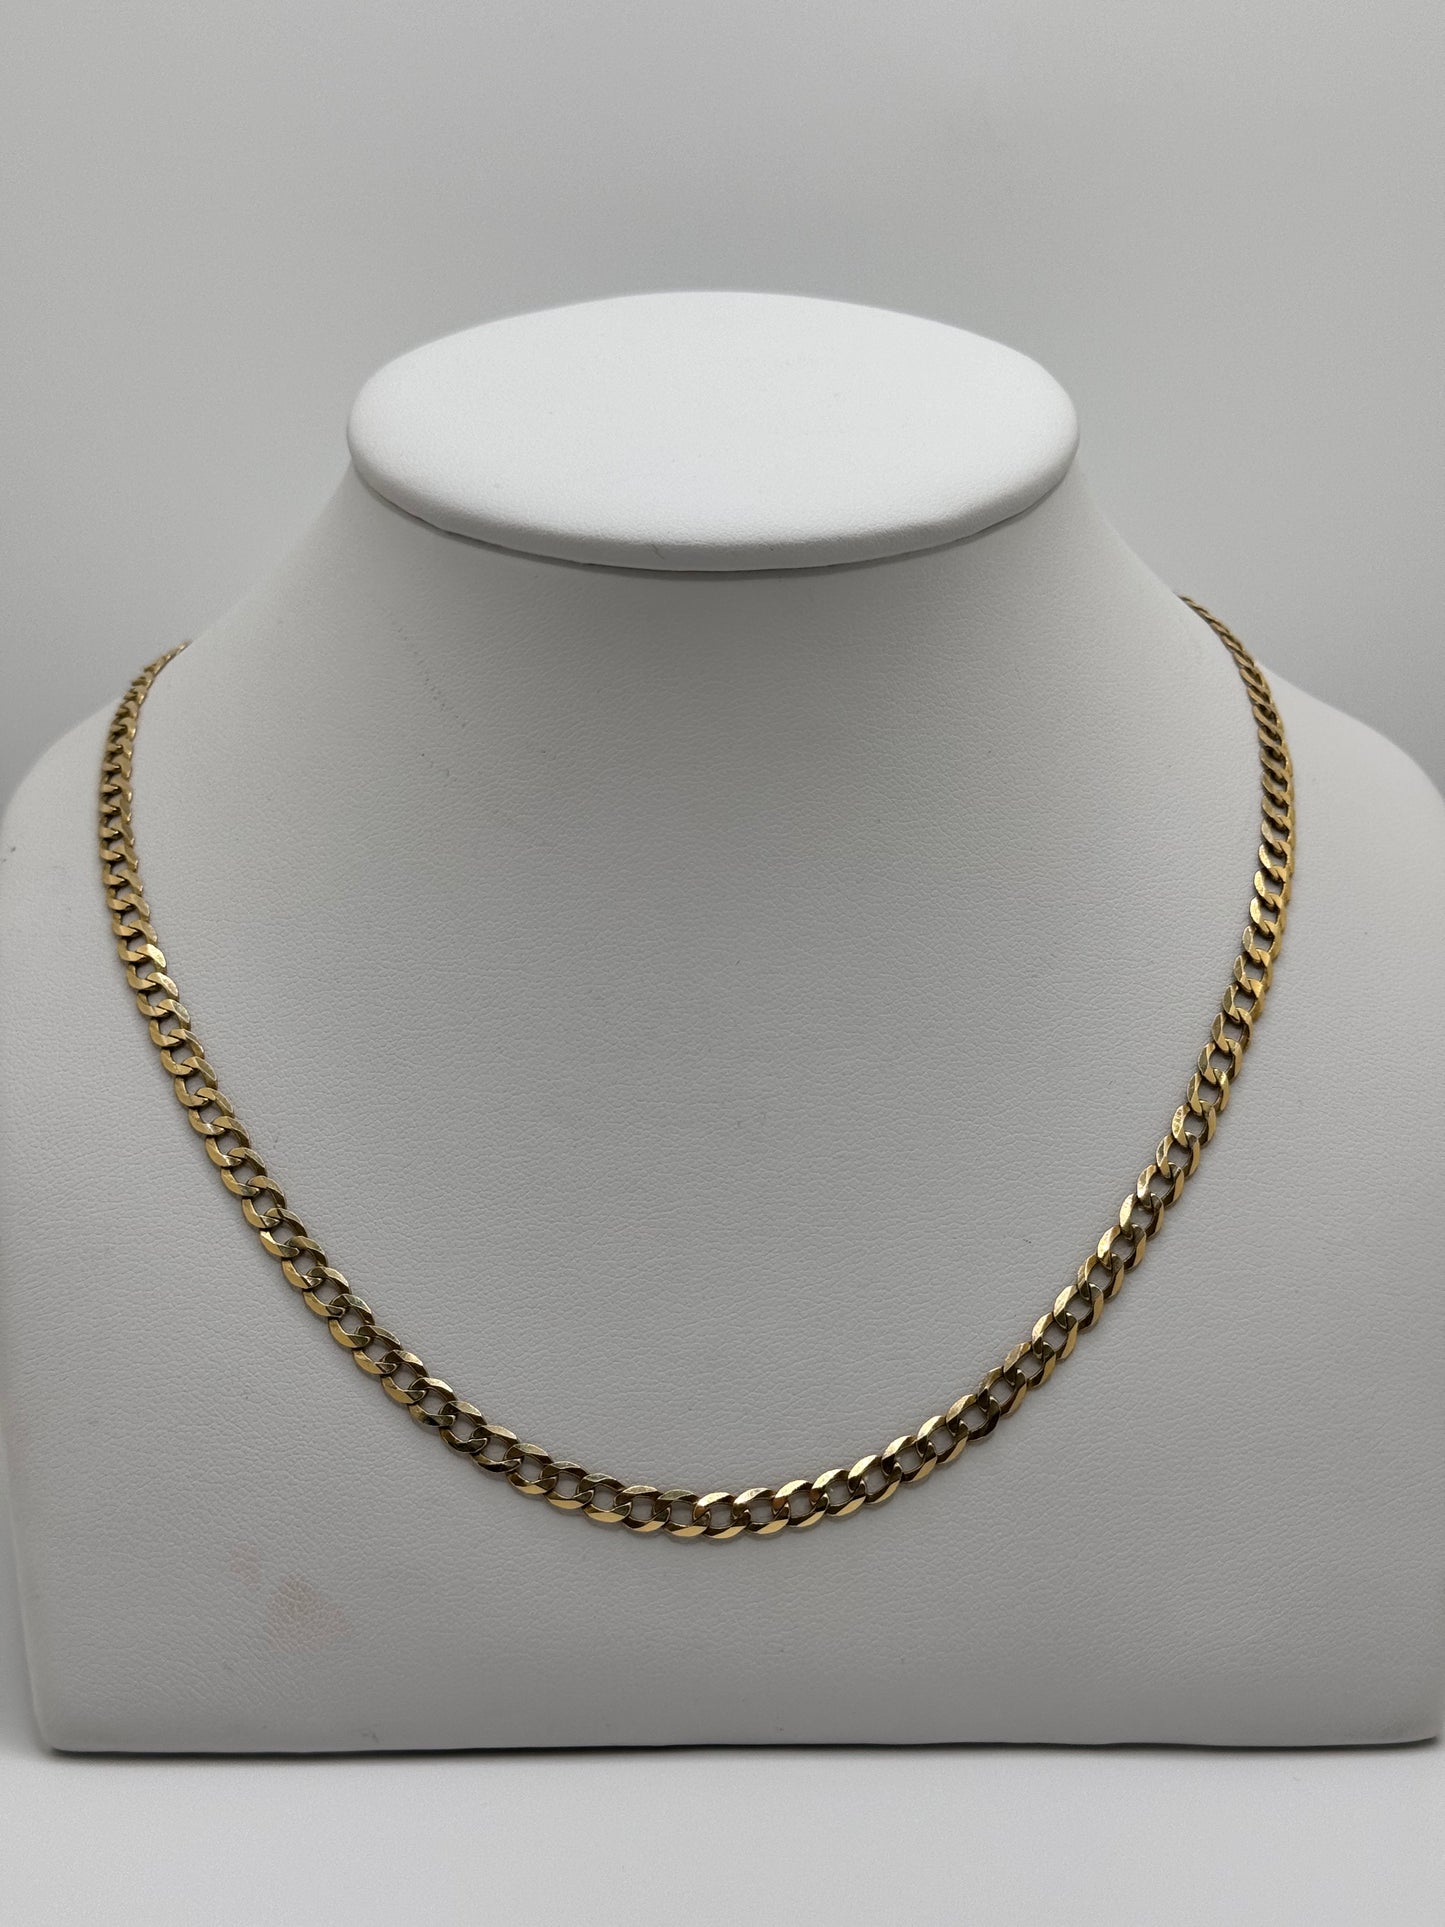 14K Solid Gold Cuban Chain 4mm